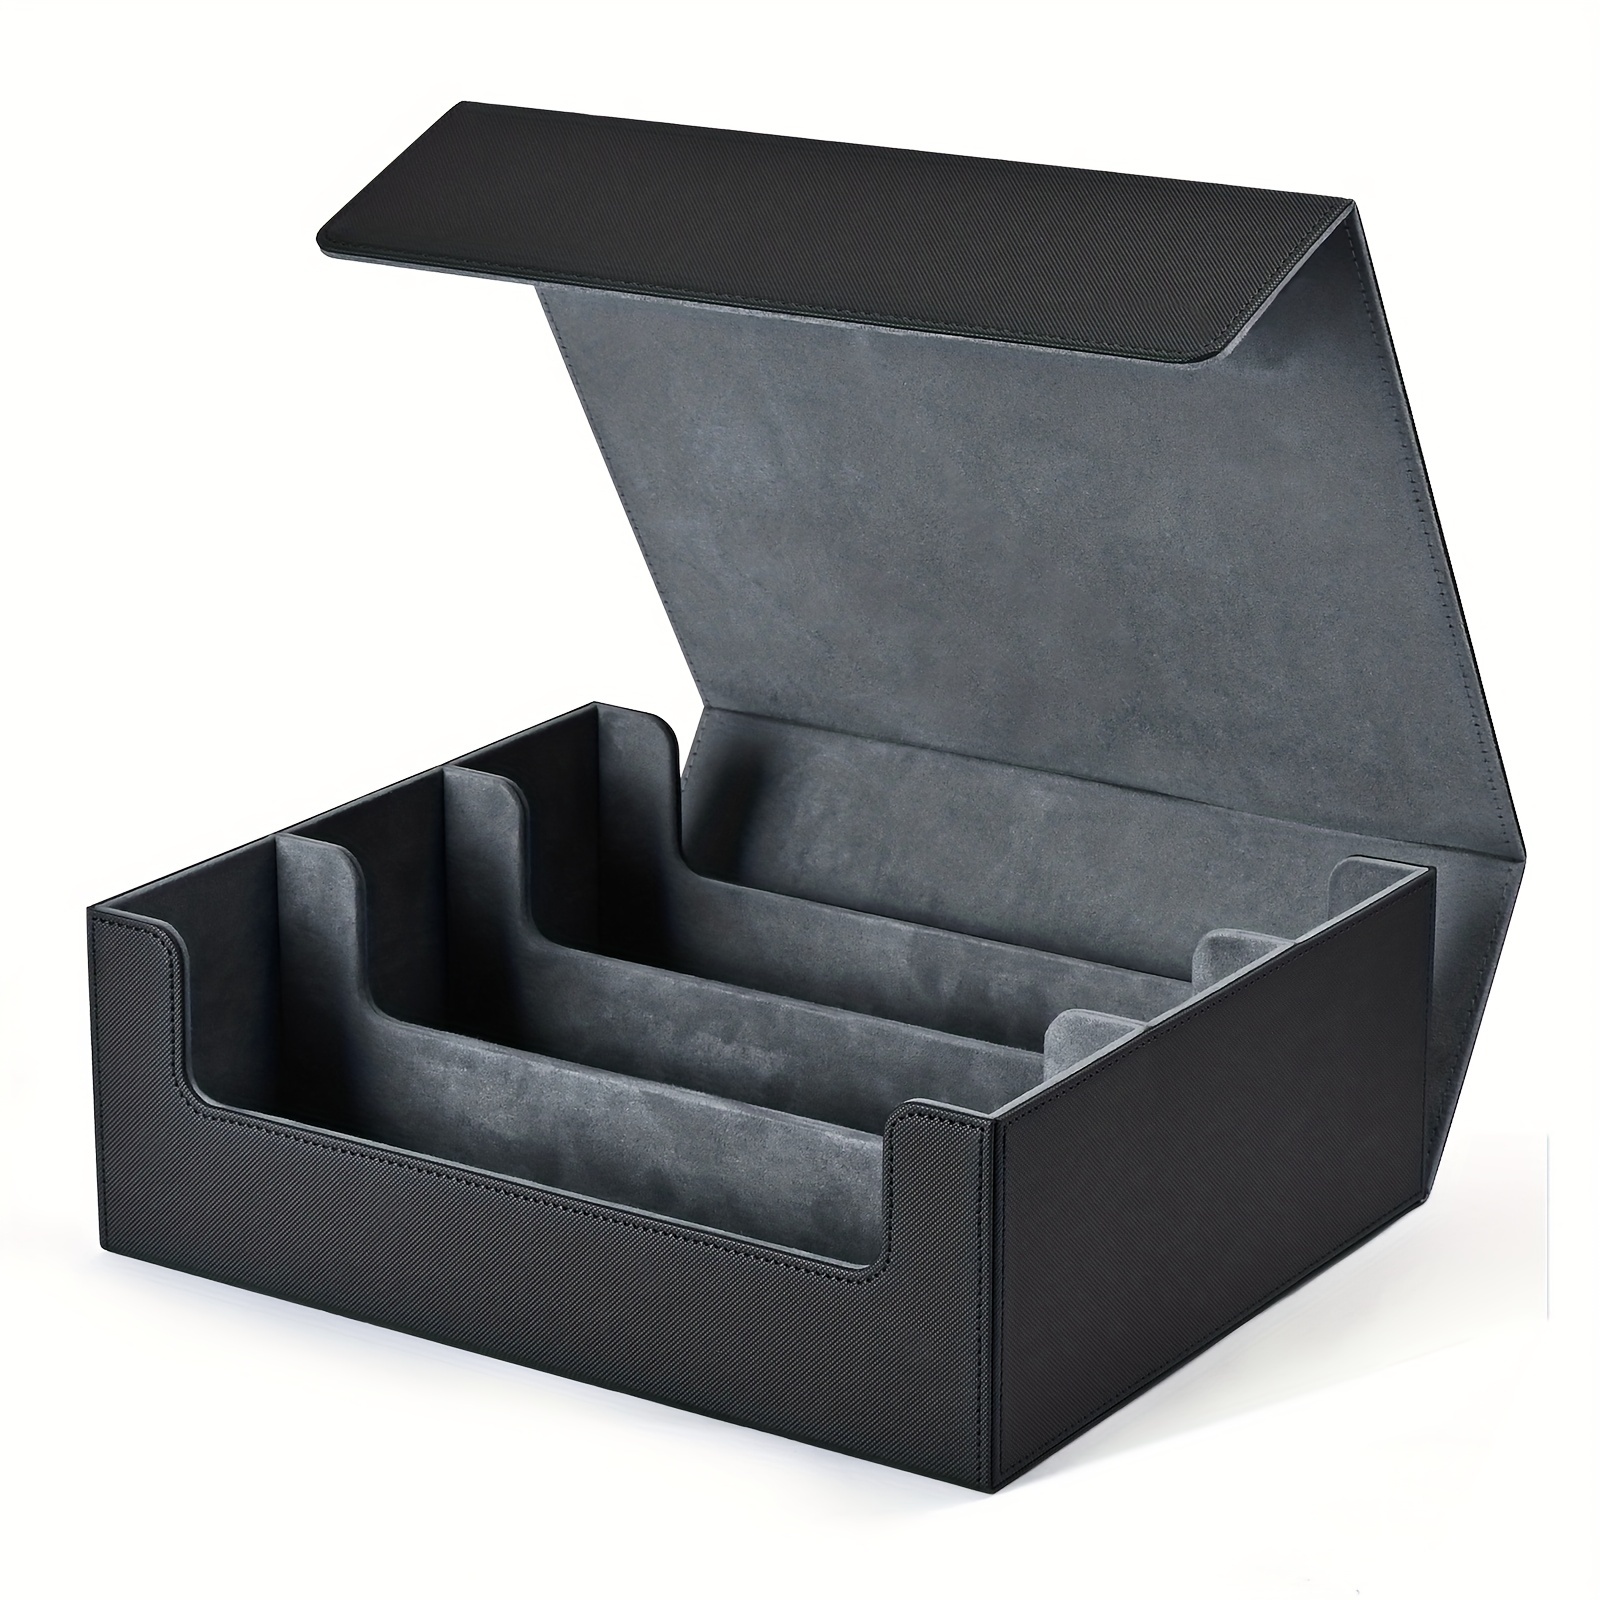  Current Black Elegance Card Organizer Box - Stores 140+ Cards,  7 x 9 x 9-1/2 : Office Products